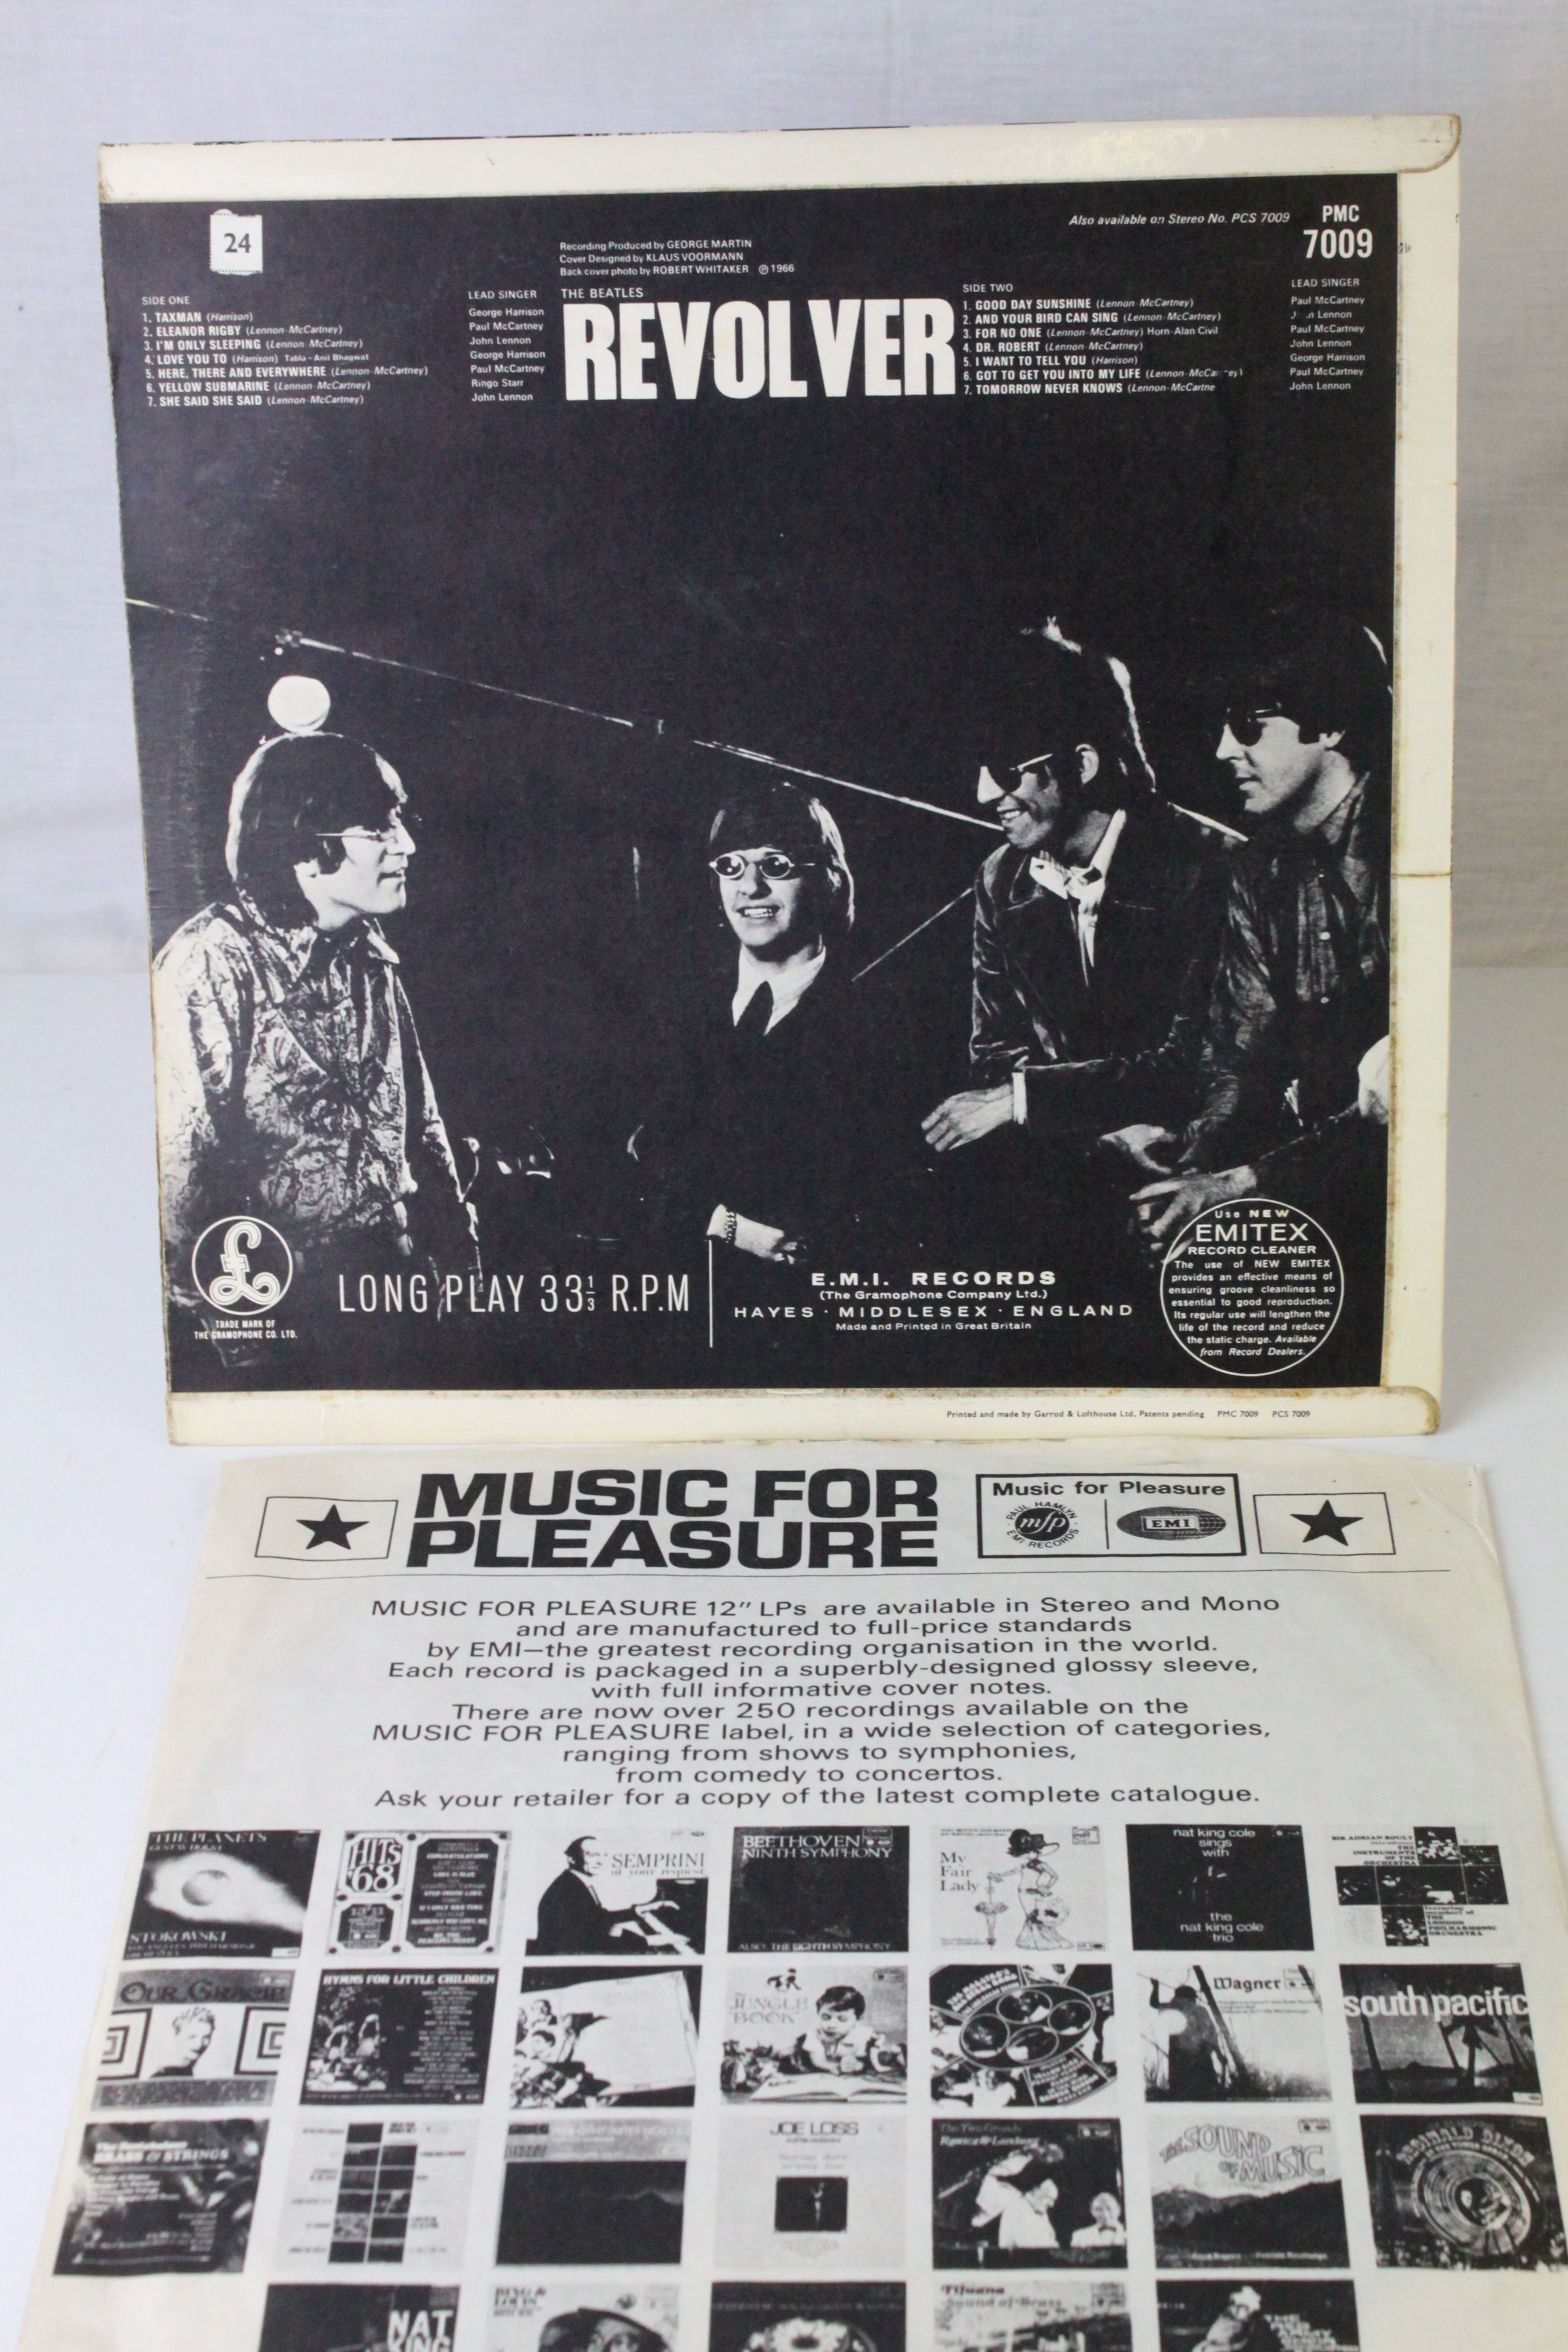 Vinyl - Four The Beatles LPs to include For Sale PMC1240 mono, Revolver PMC7009 mono, With The - Image 7 of 21